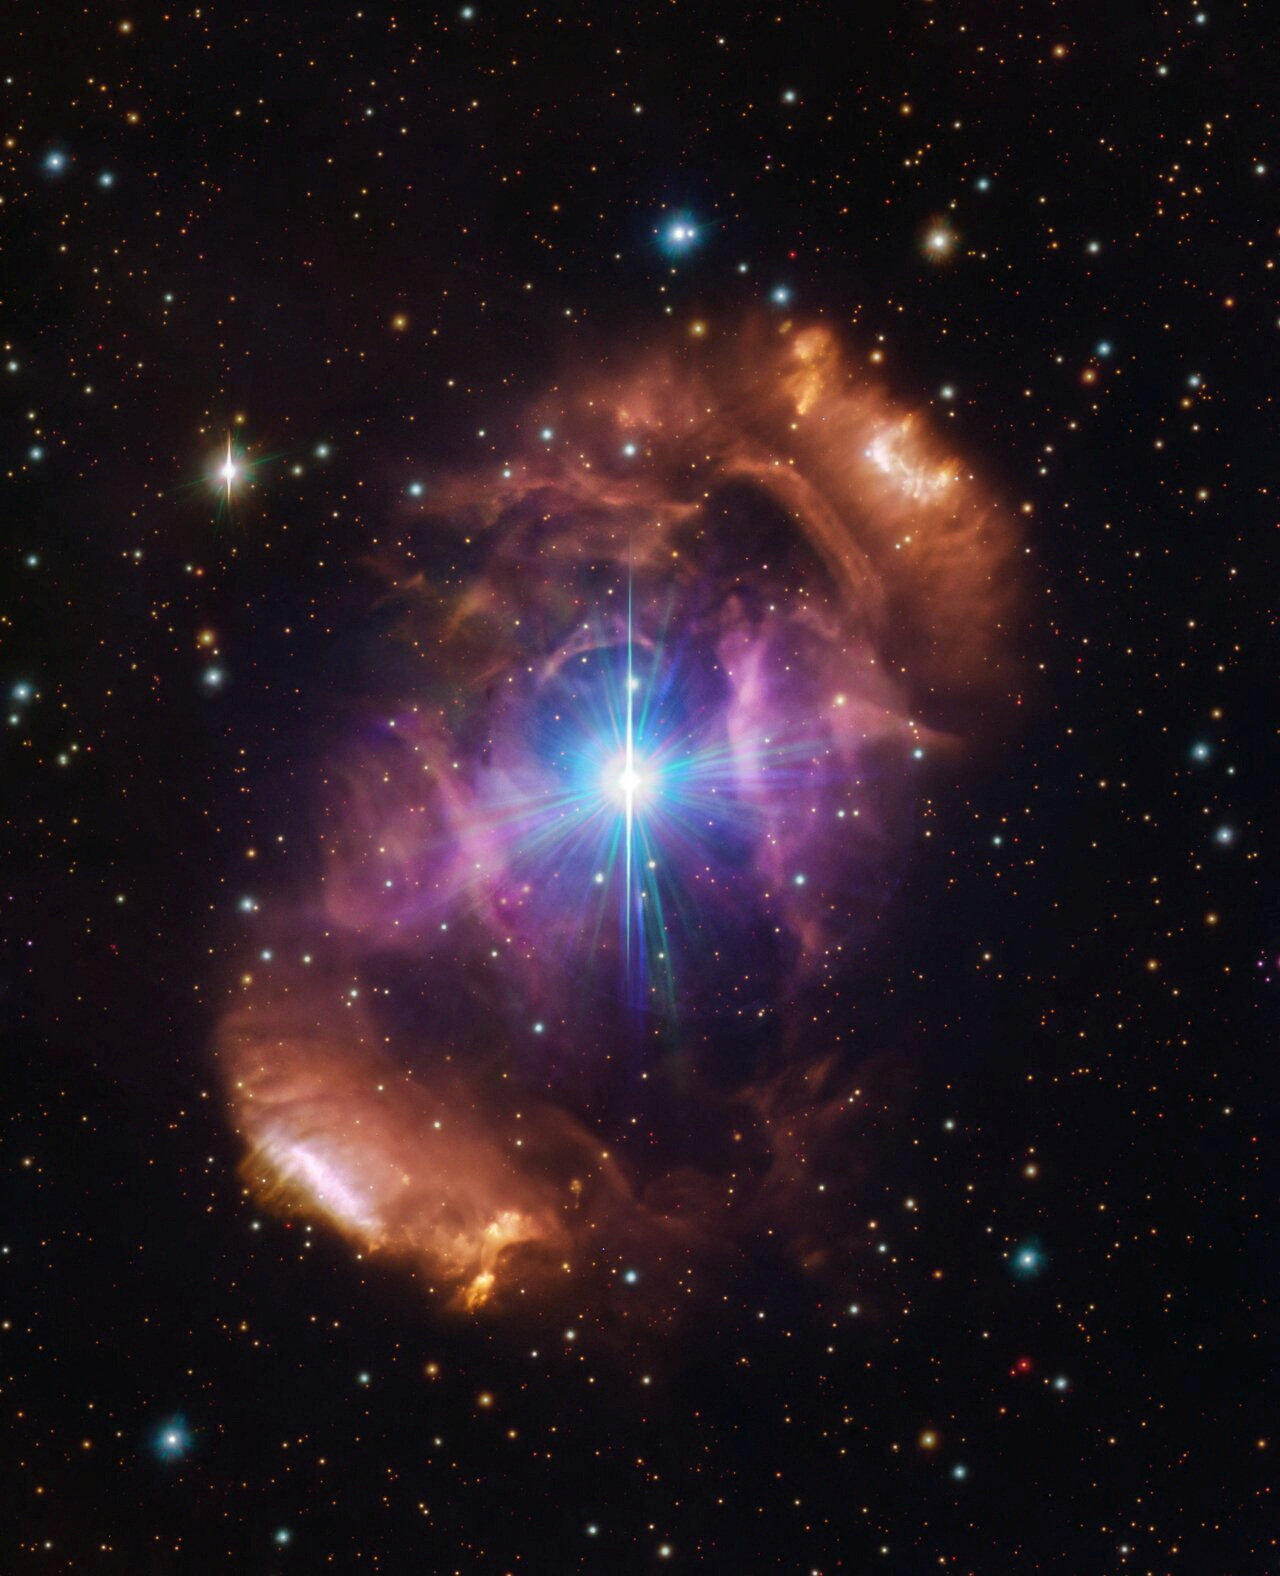 Image of nebula NGC 6164/6165 taken with the VLT Survey Telescope hosted at the European Southern Observatory's Paranal Observatory in Cerro Paranal